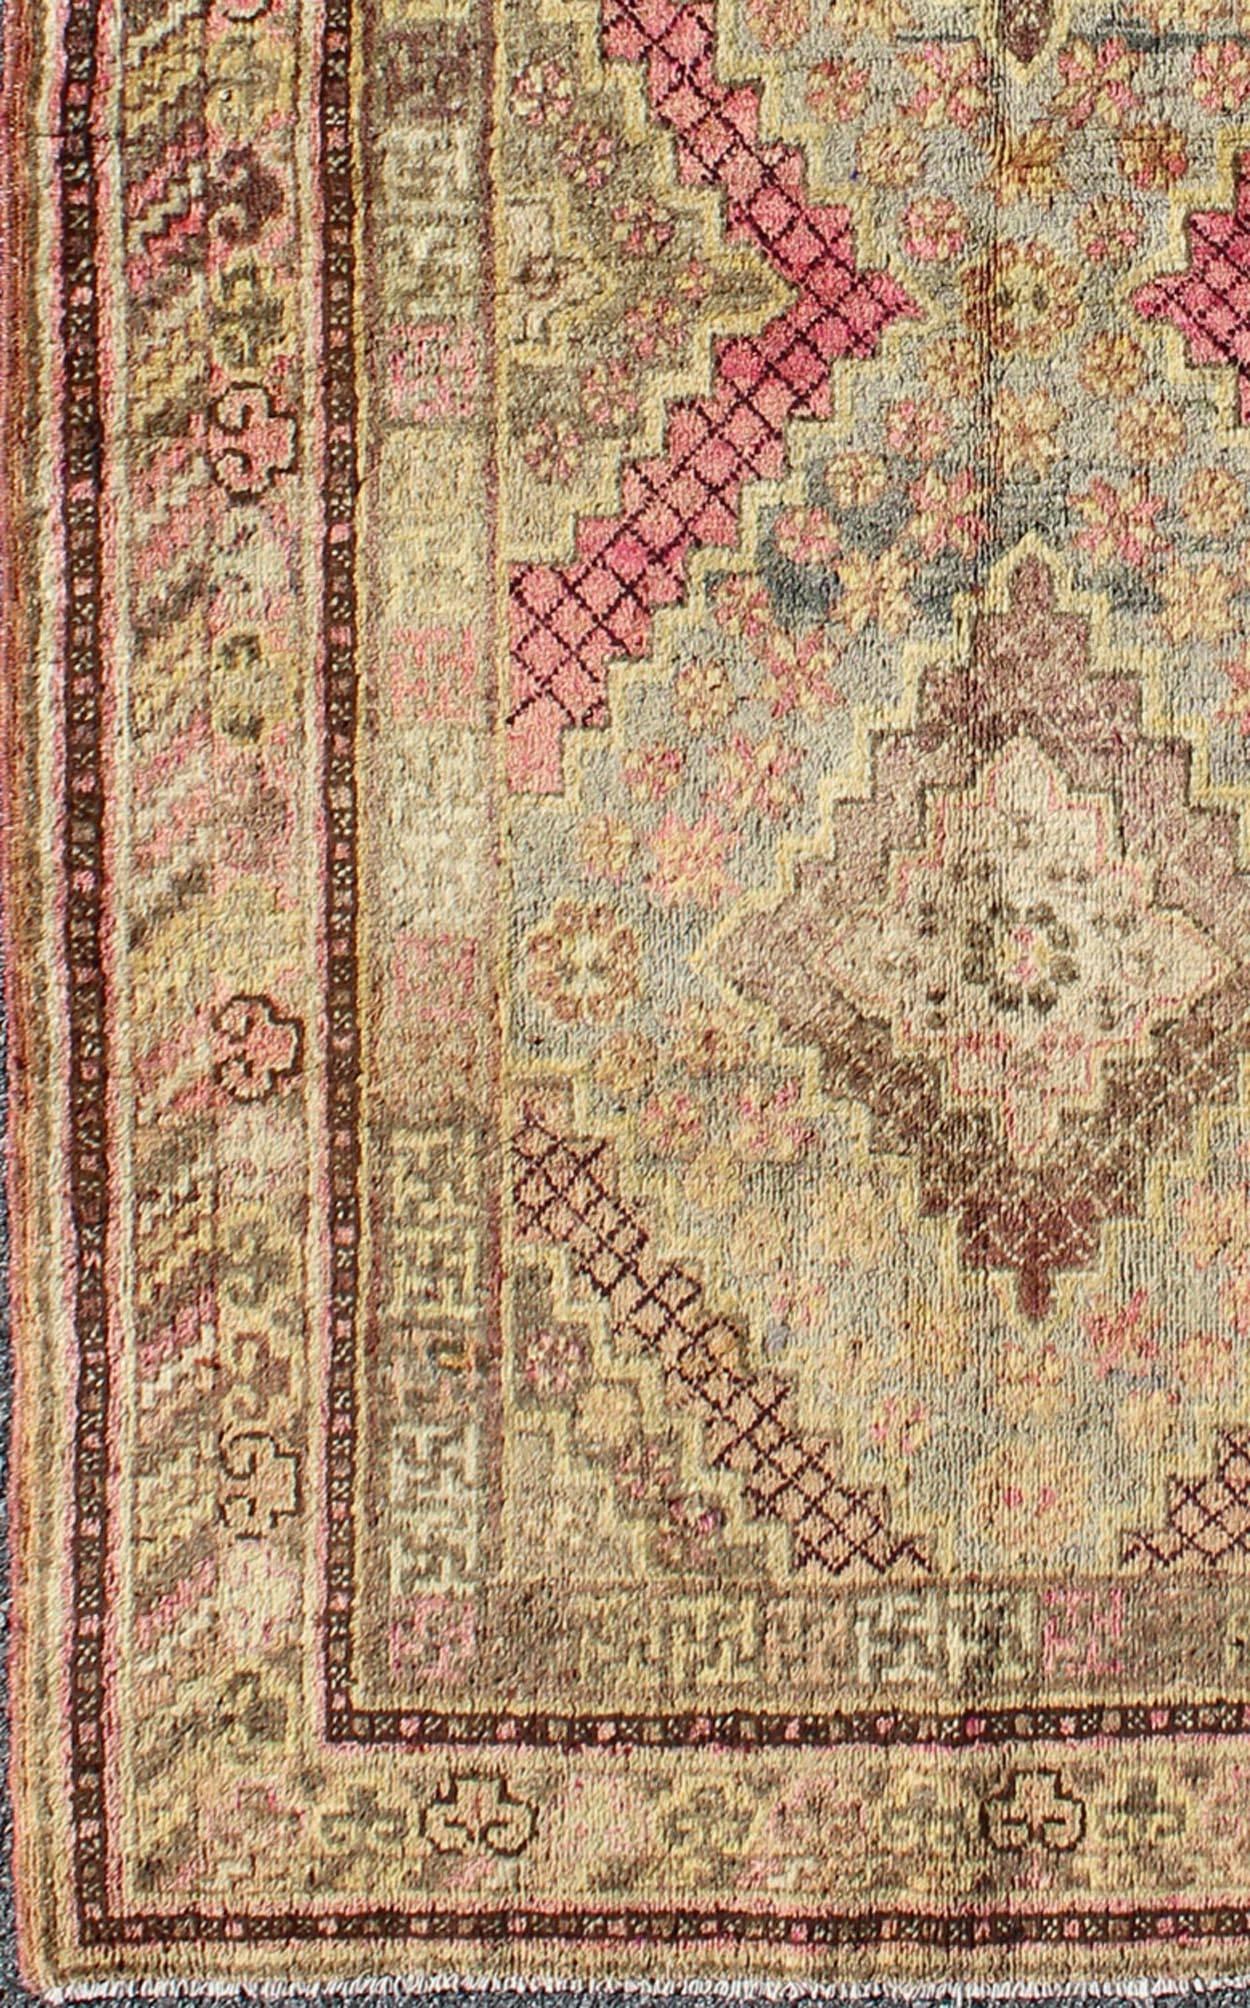 Early 20th century antique Khotan rug with paired diamond medallions in wine red, rug mp-1301-519, country of origin / type: East Turkestan / Khotan, circa 1920

This delicately rendered antique Khotan rug was handcrafted in Turkestan during the